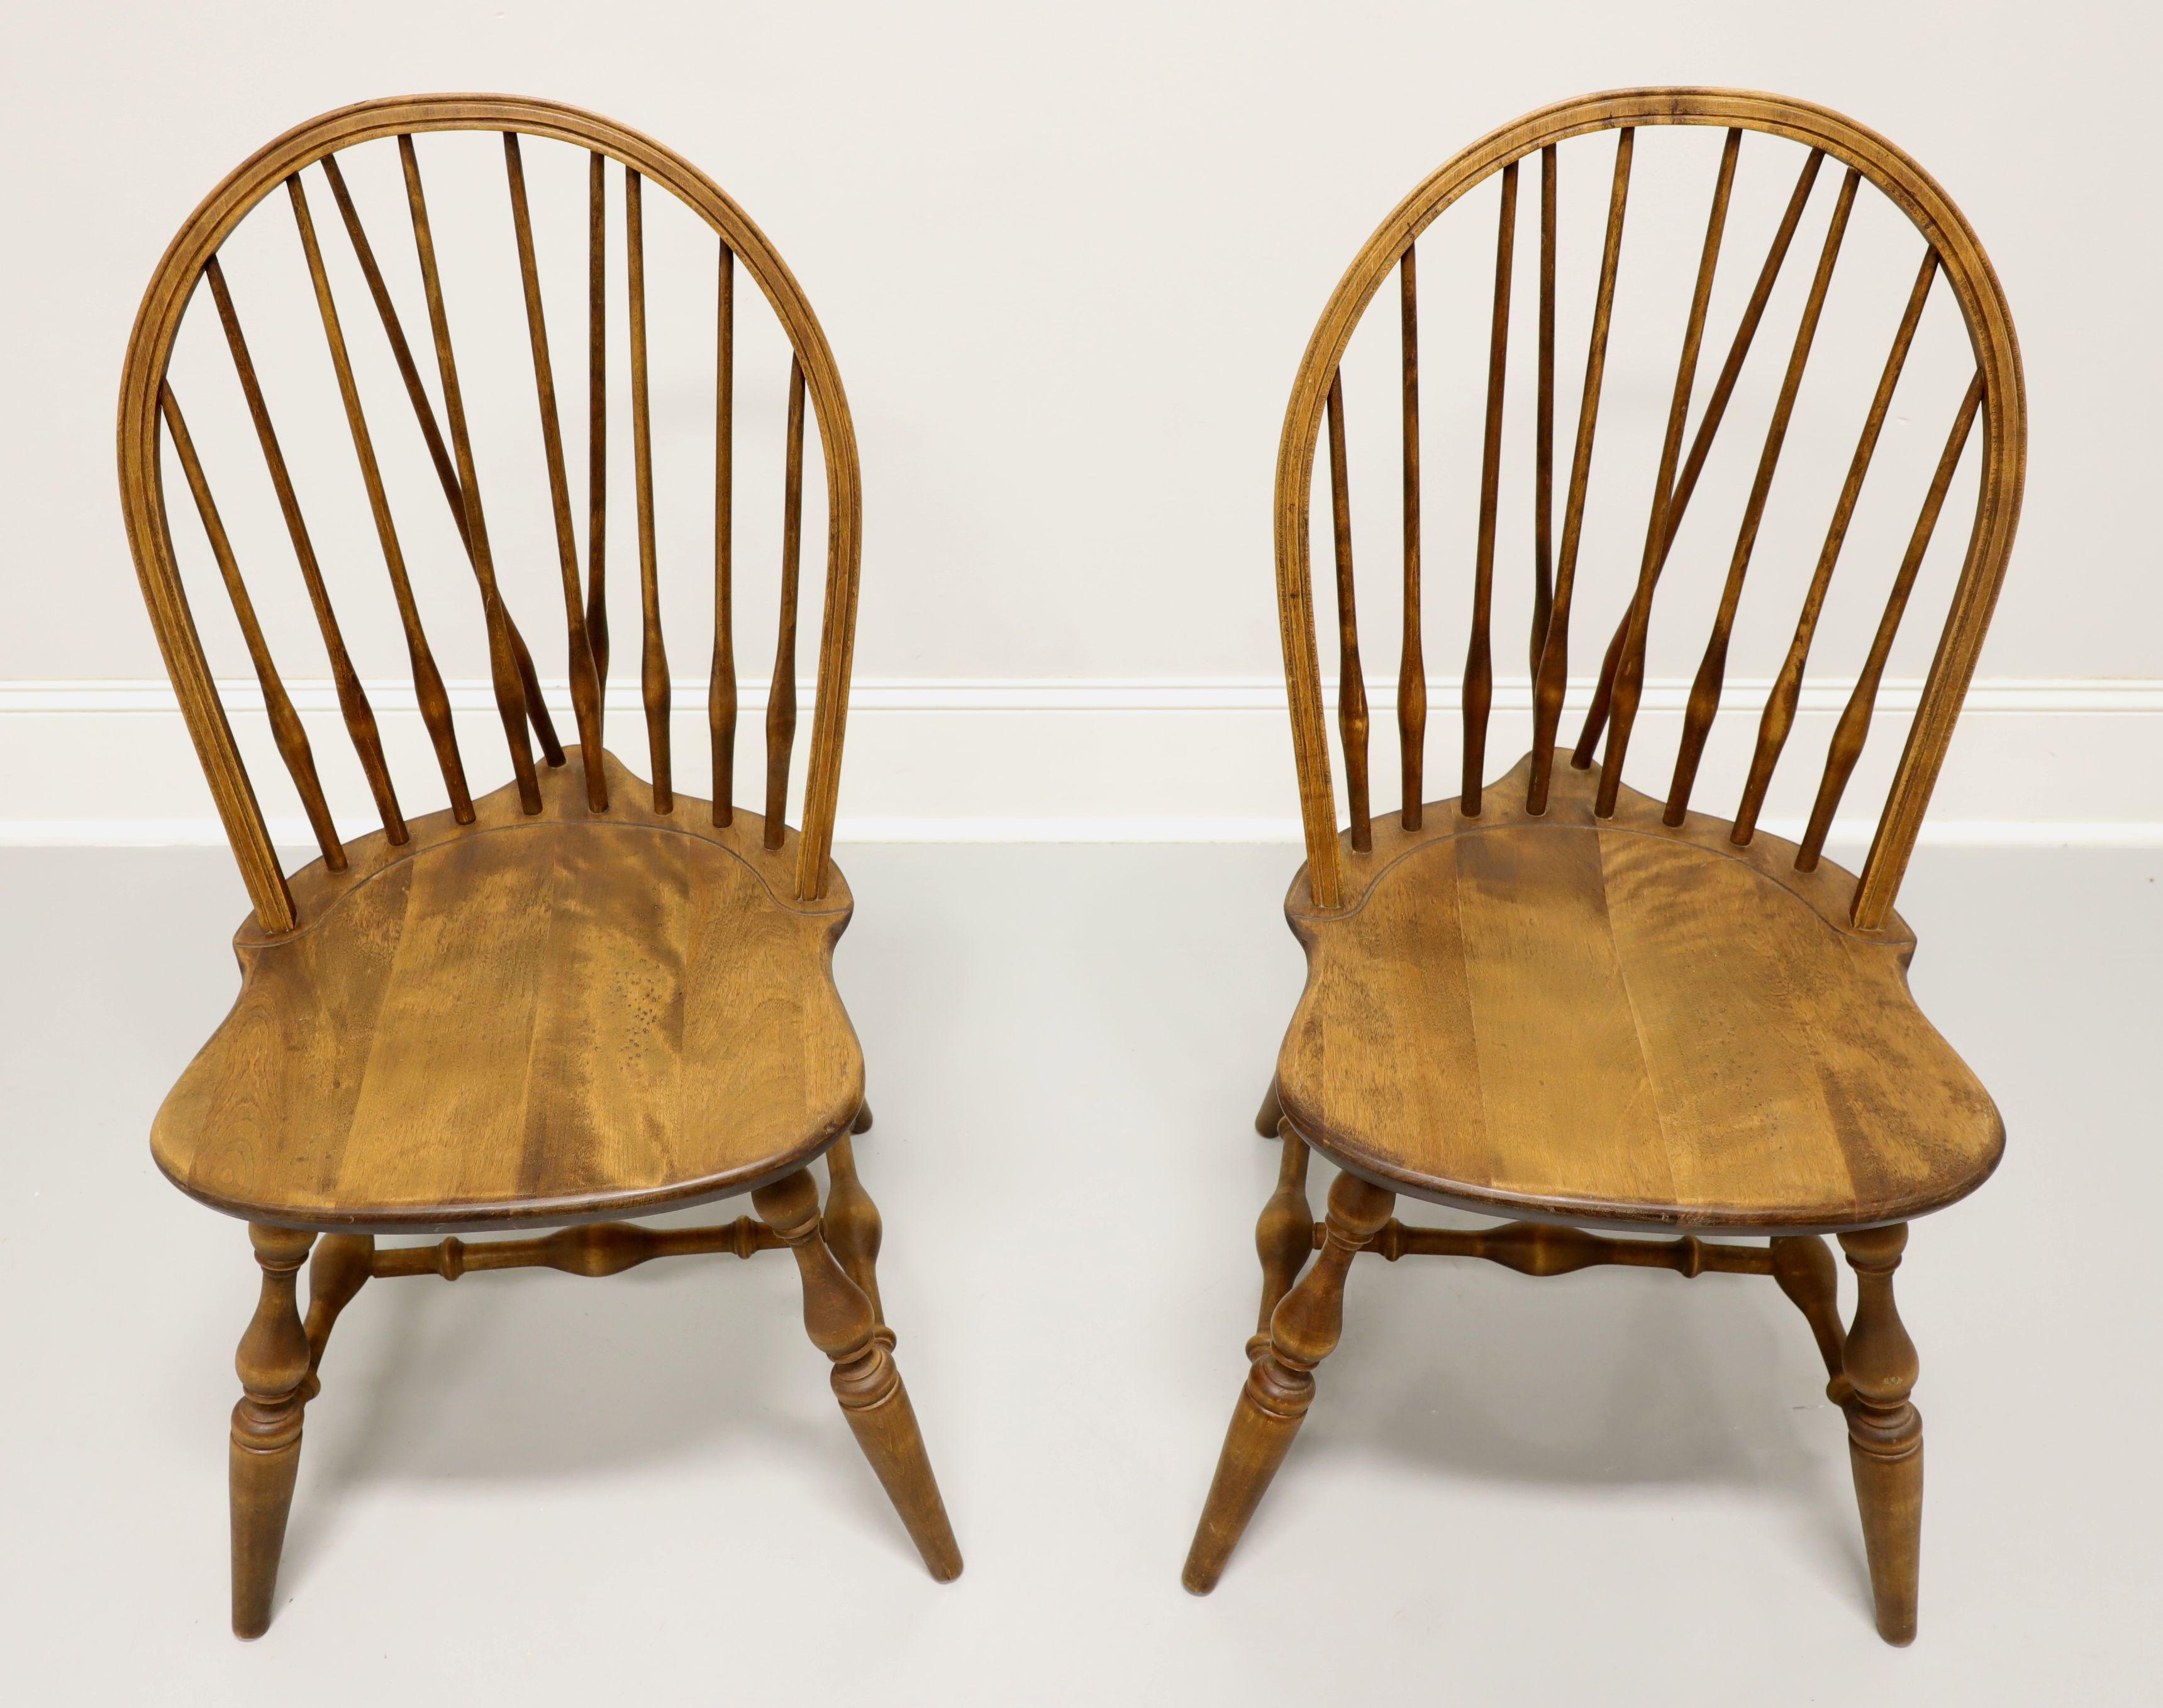 A pair of Windsor style dining side chairs by Habersham Plantation, of Clarksville, Georgia, USA. Solid pine, hoop back with spindles, saddle shape seat, tail-supports with spindles, turned legs and stretchers. Made in the late 20th